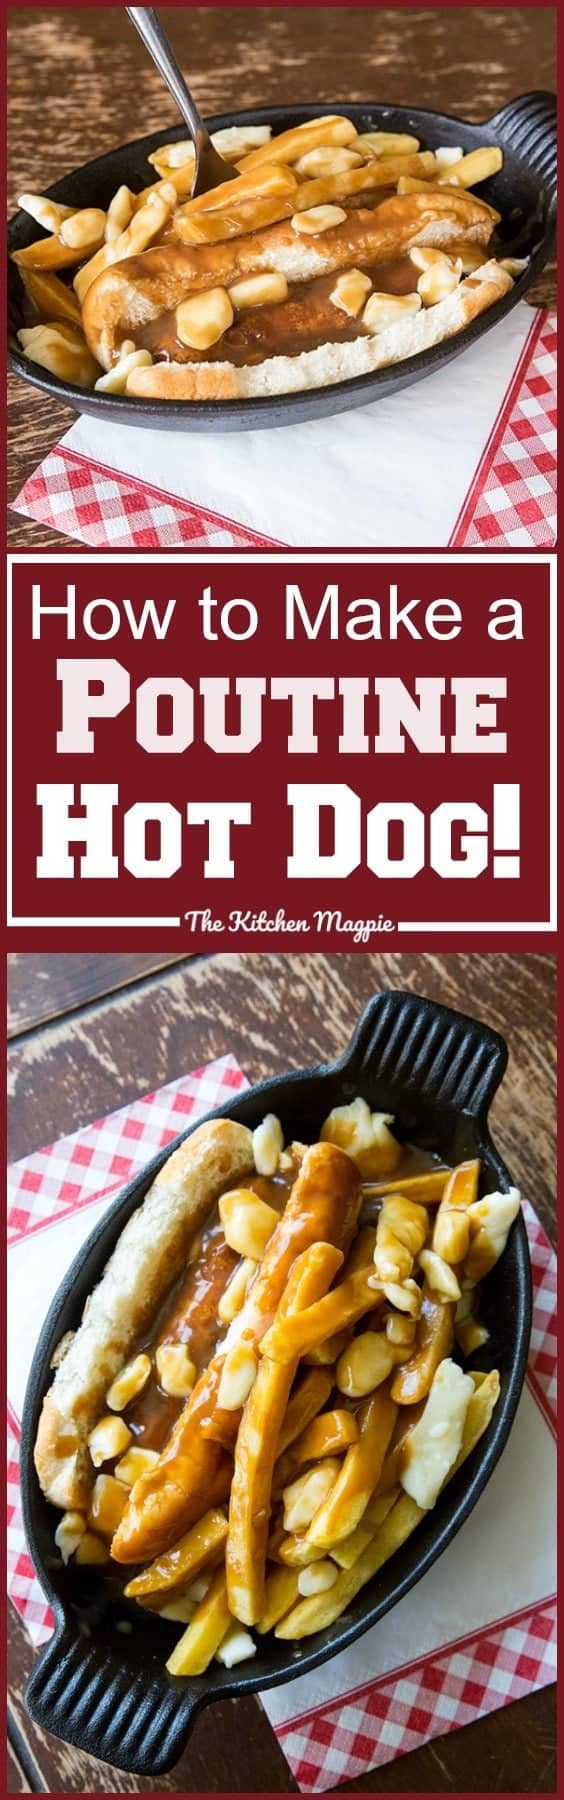 How to Make Poutine Hot Dogs! This crazy Canadian treat uses melty cheese curds and gravy on top of a hot dog! SO DELICIOUS! 